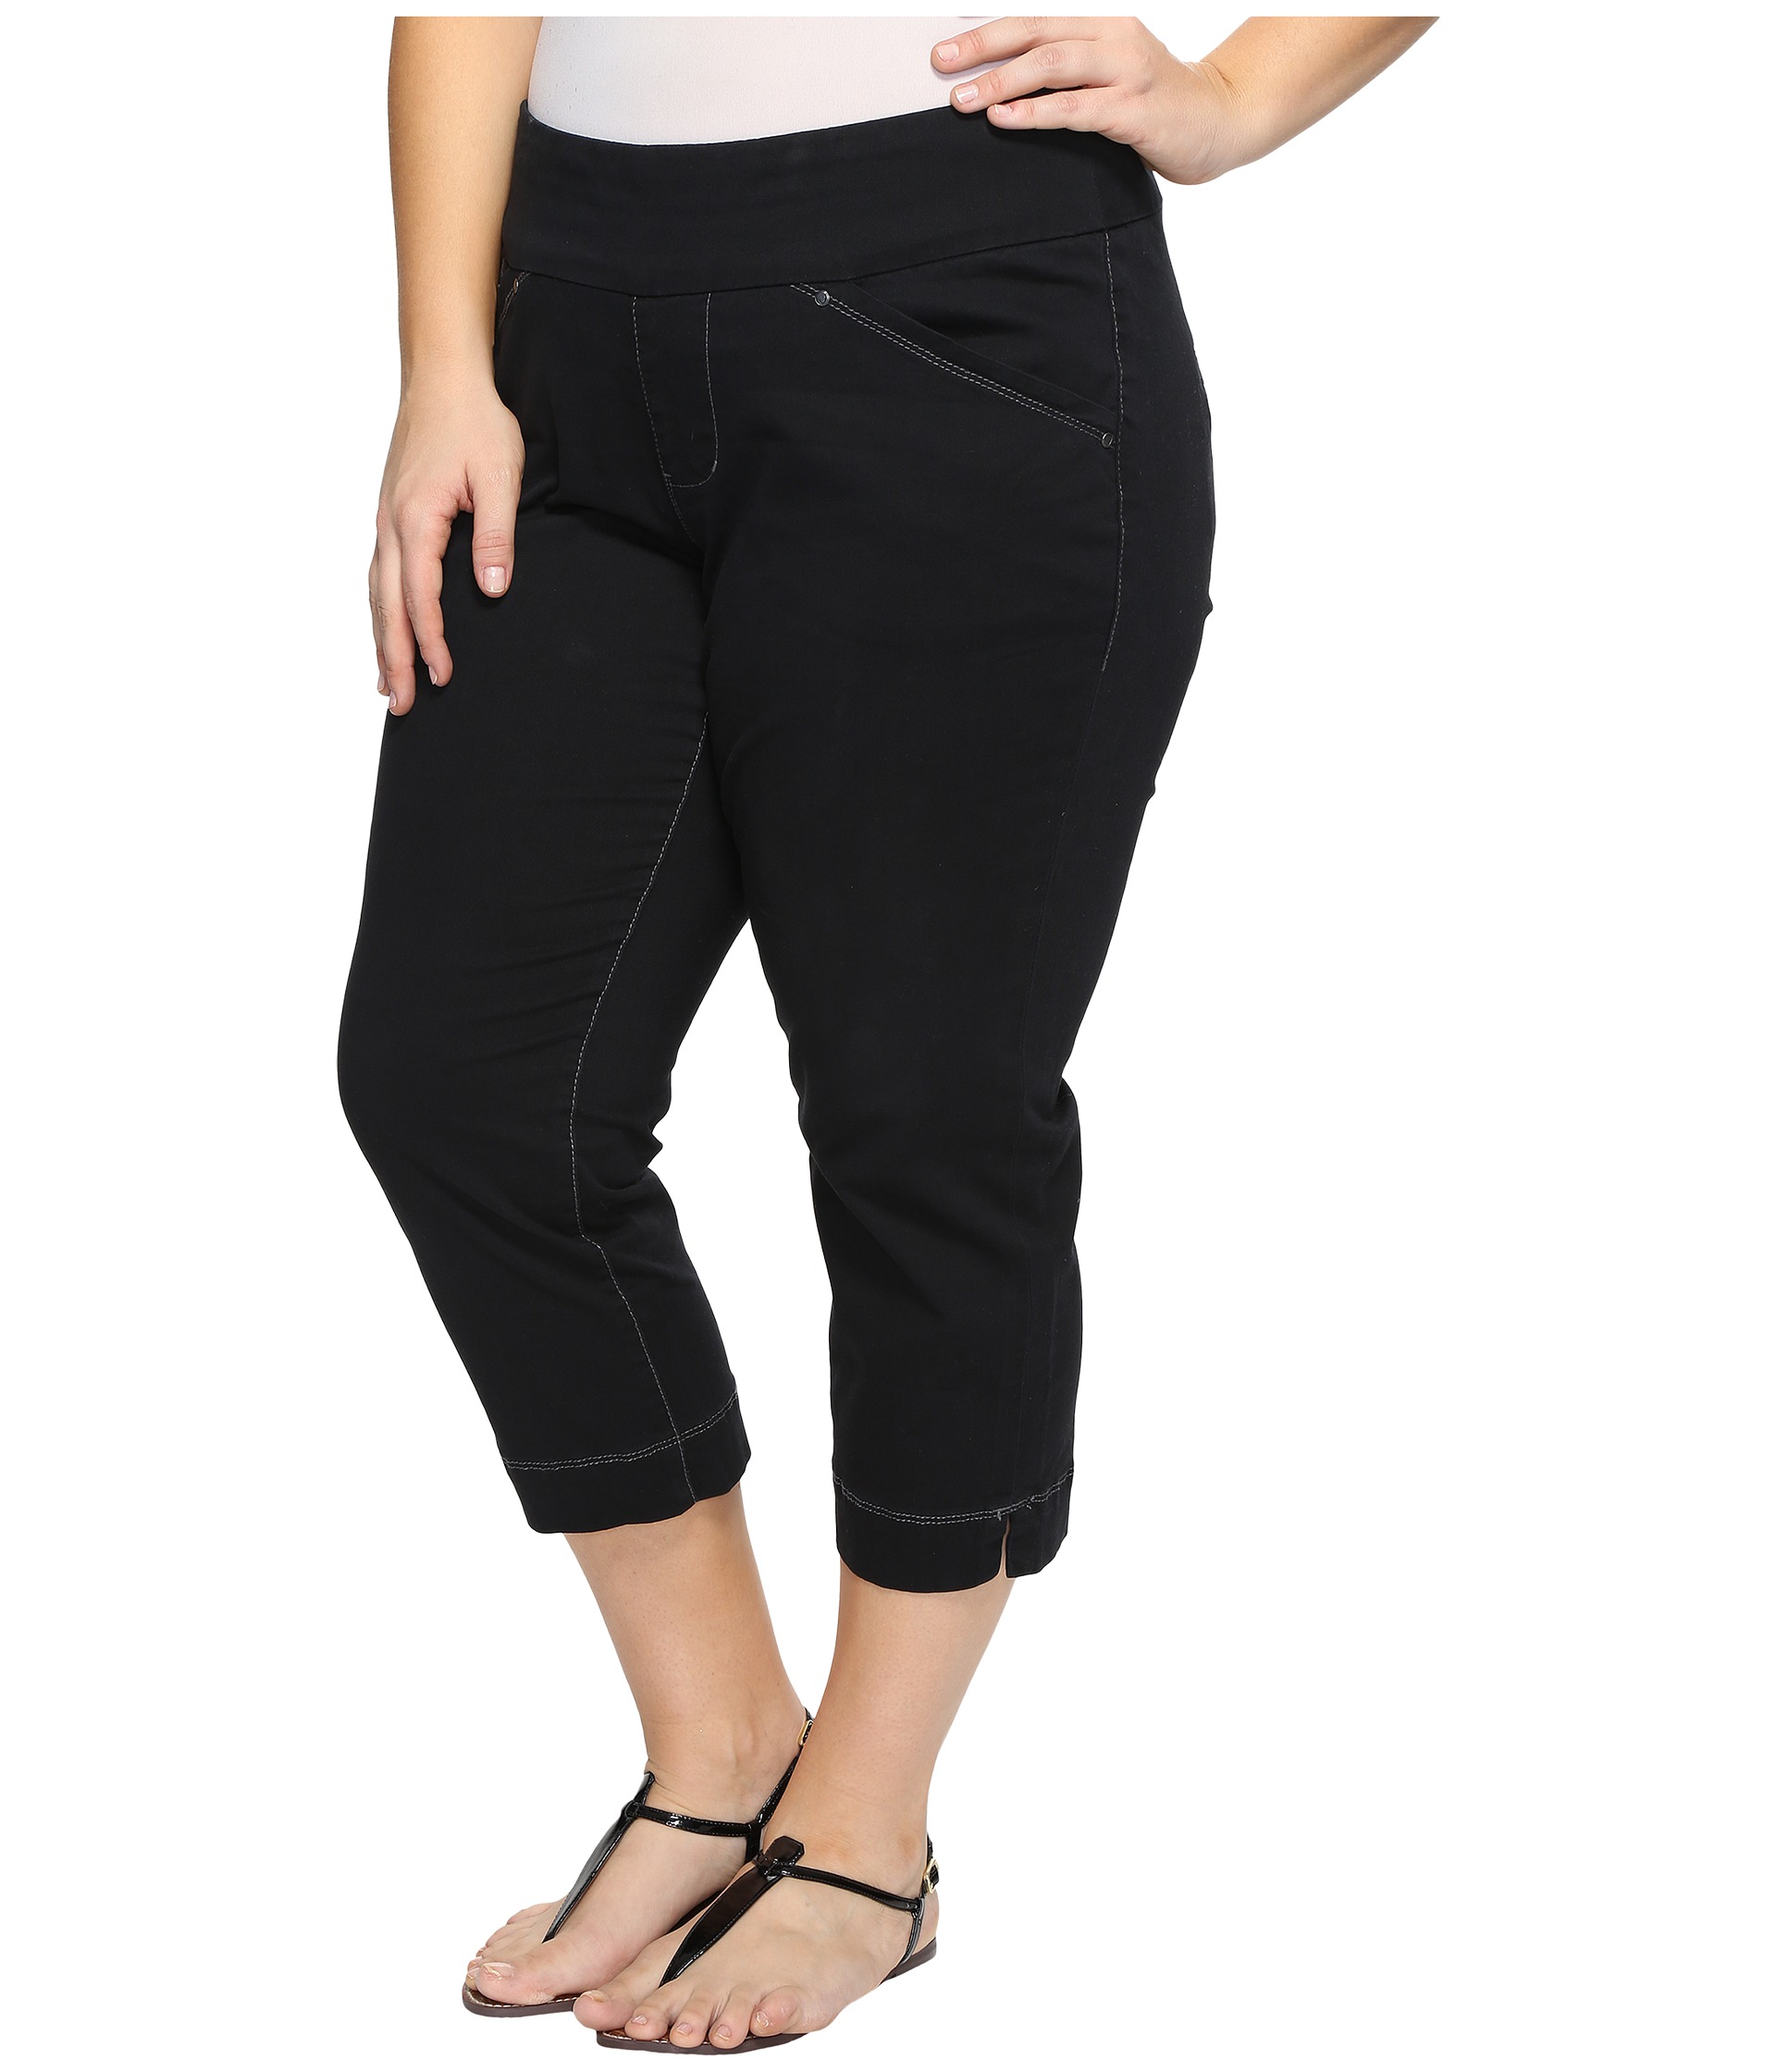 Jag Jeans Plus Size Plus Size Marion Crop in Bay Twill at Zappos.com